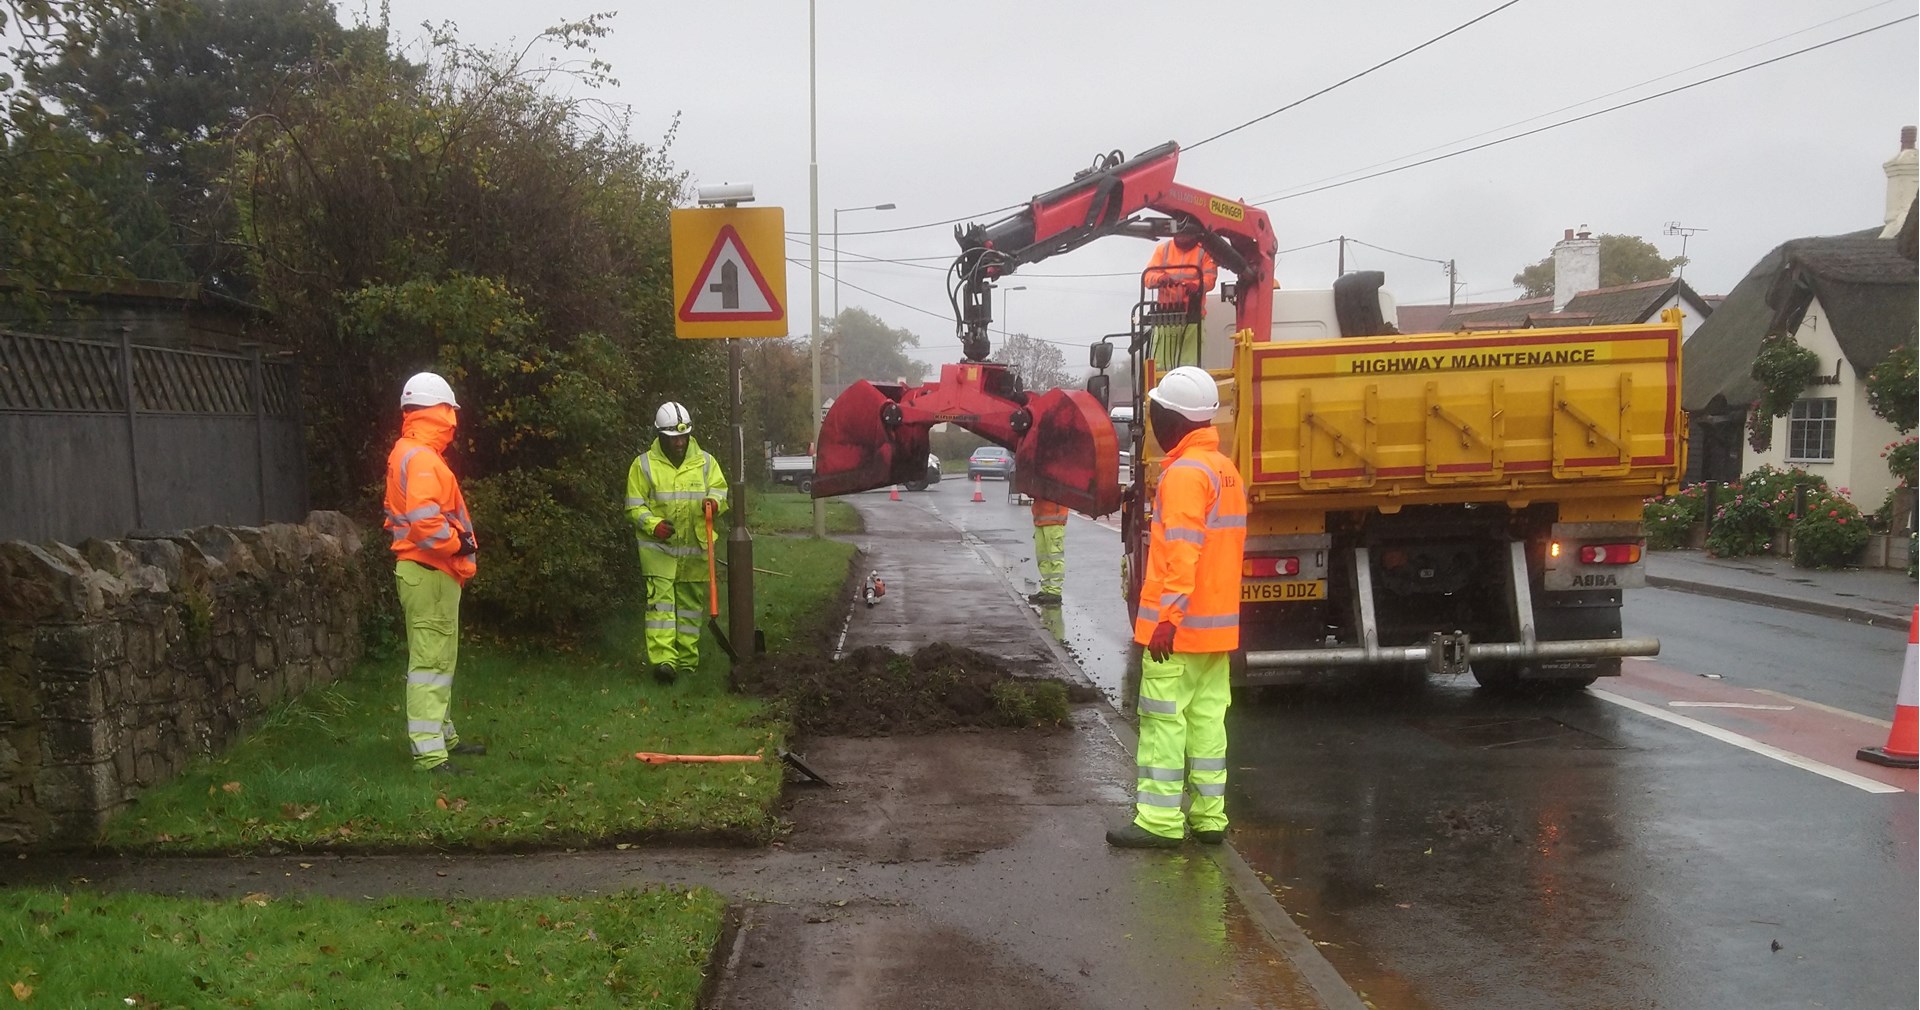 October: Highways spend 3 days clearing footpaths through Leebotwood on the A49